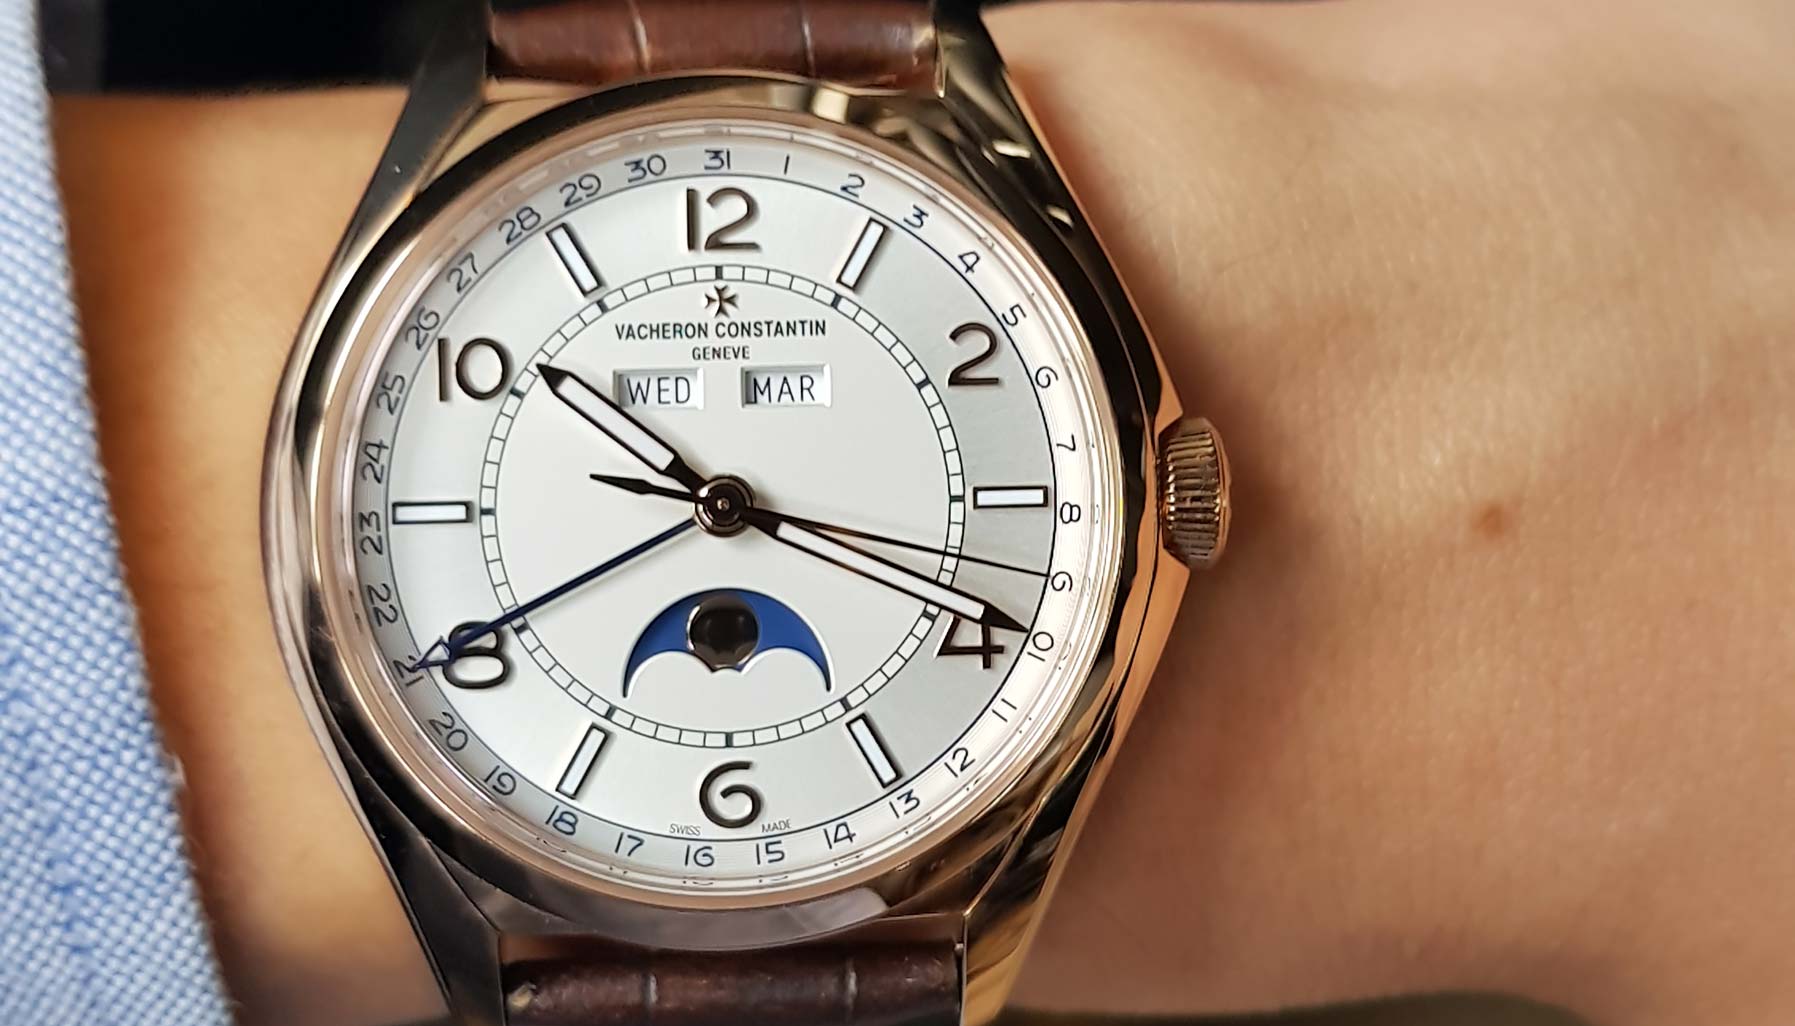 Vacheron Constantin Fiftysix Complete Calendar Review, price and